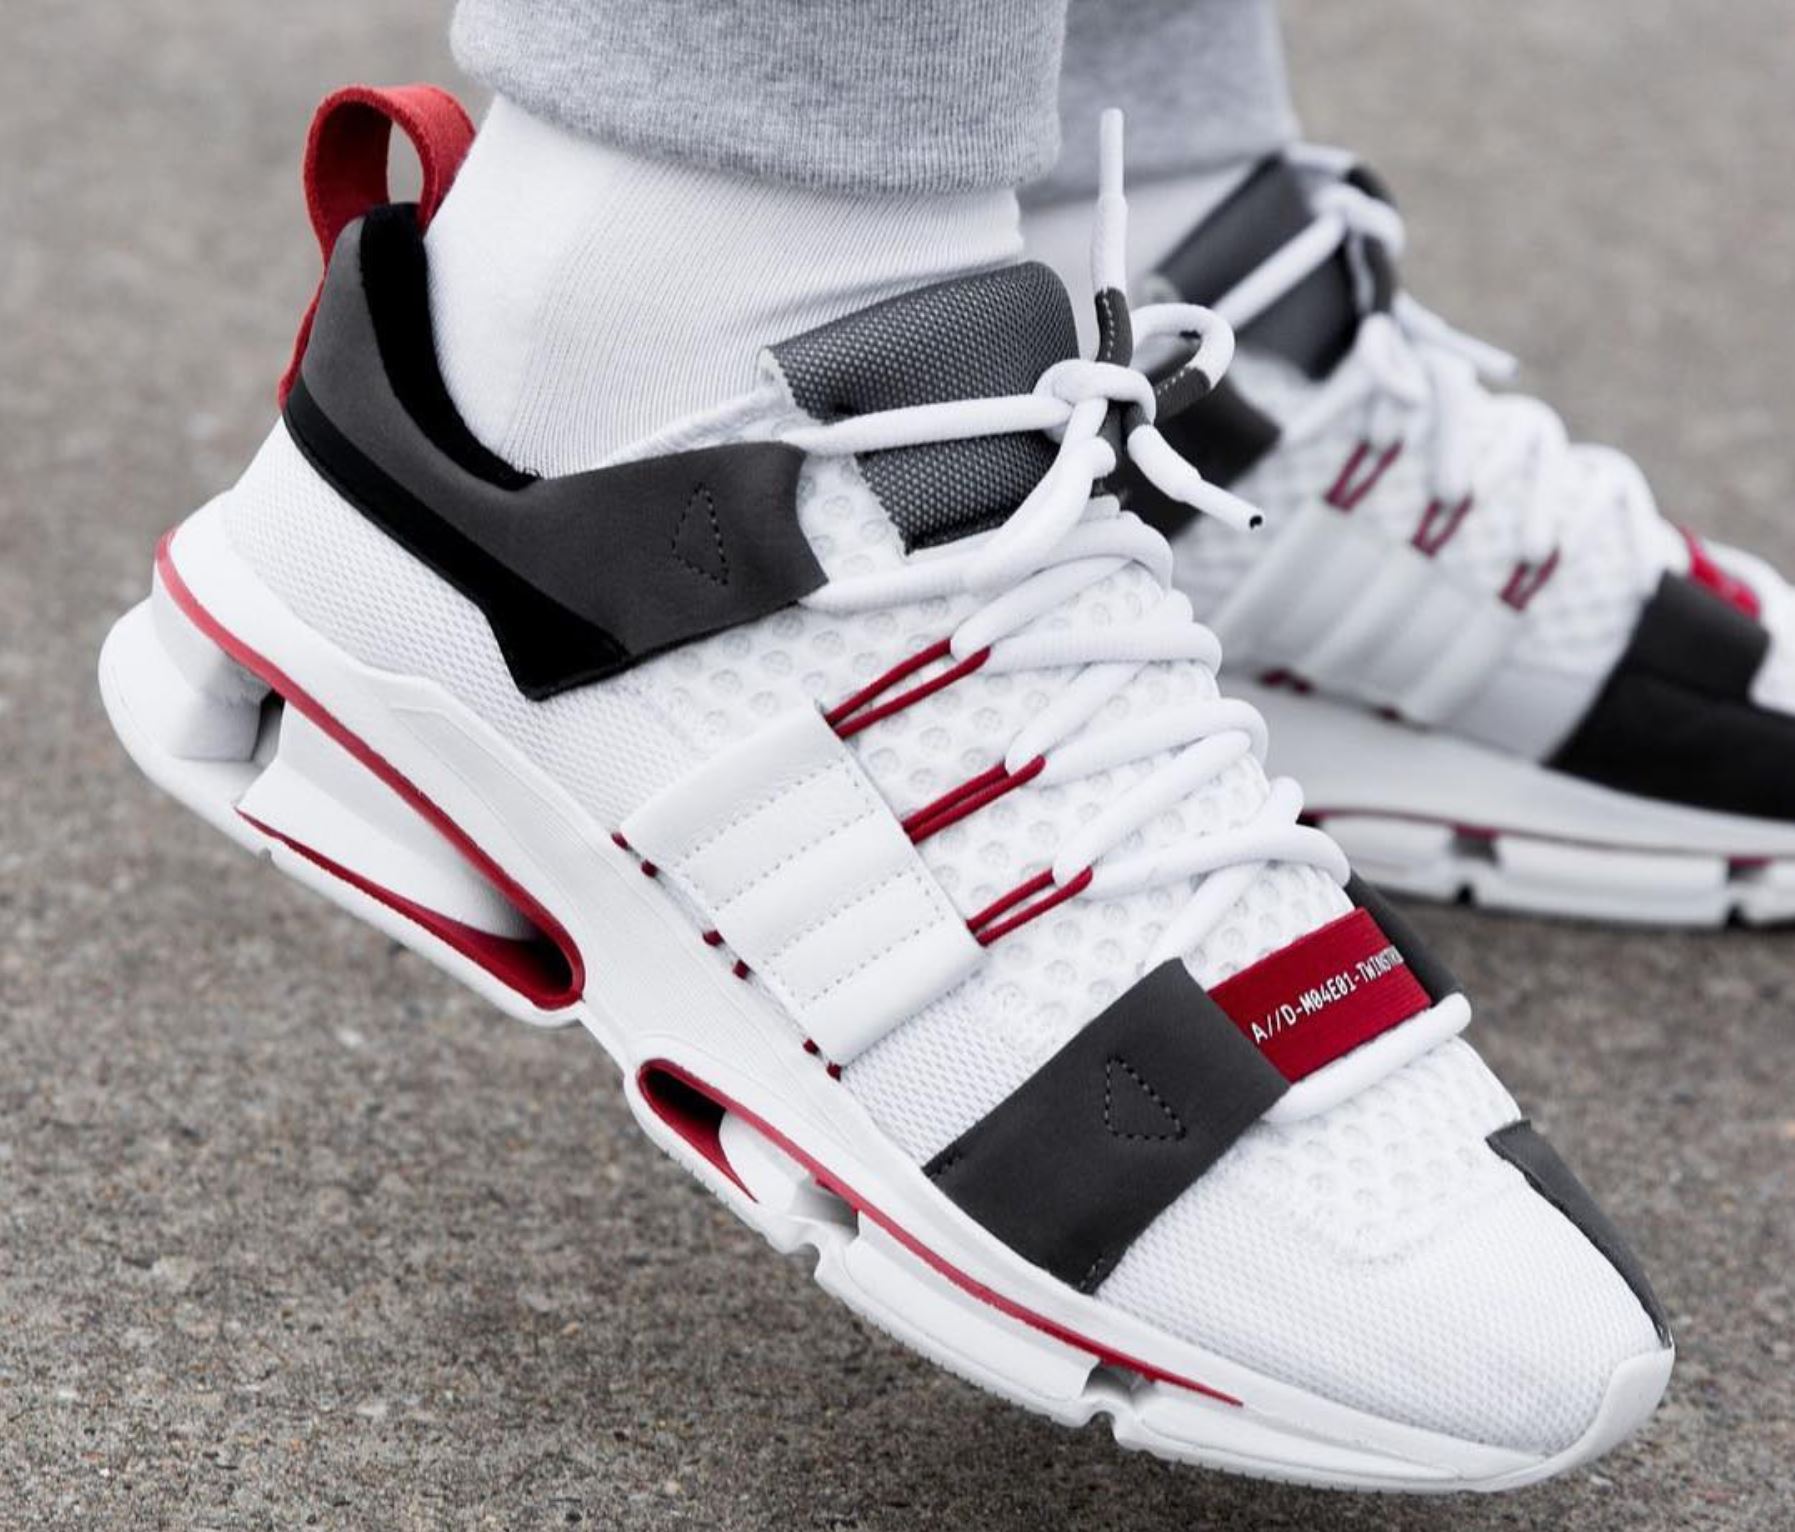 Striking adidas Consortium Twinstrike ADV (A//D) to Release for 